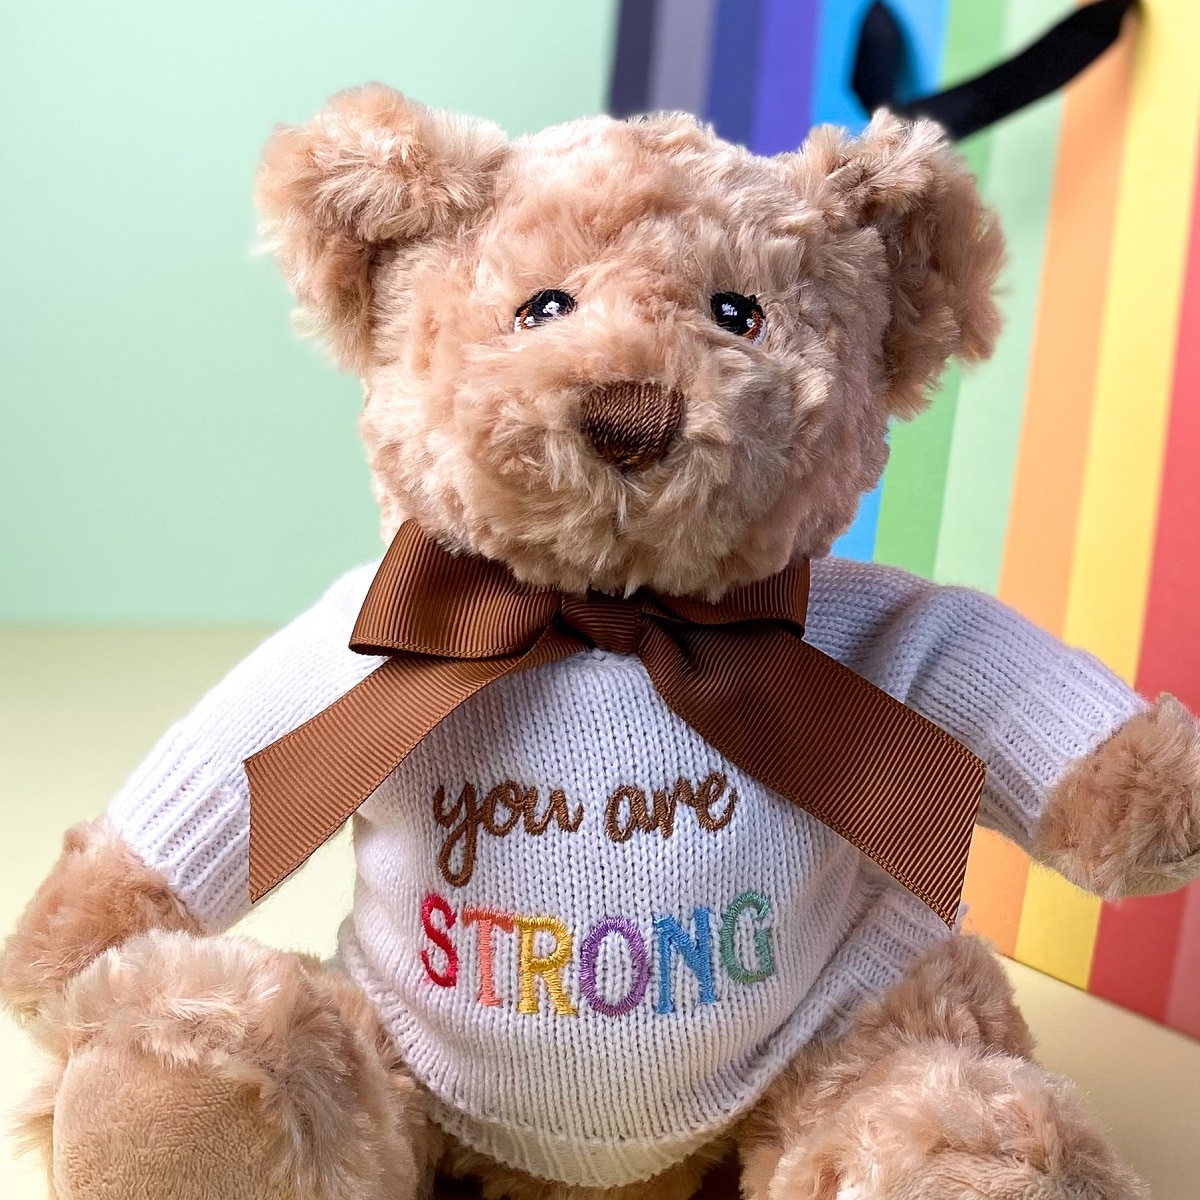 Keeleco recycled small Dougie caring bear soft toy with 'You Are Strong' jumper